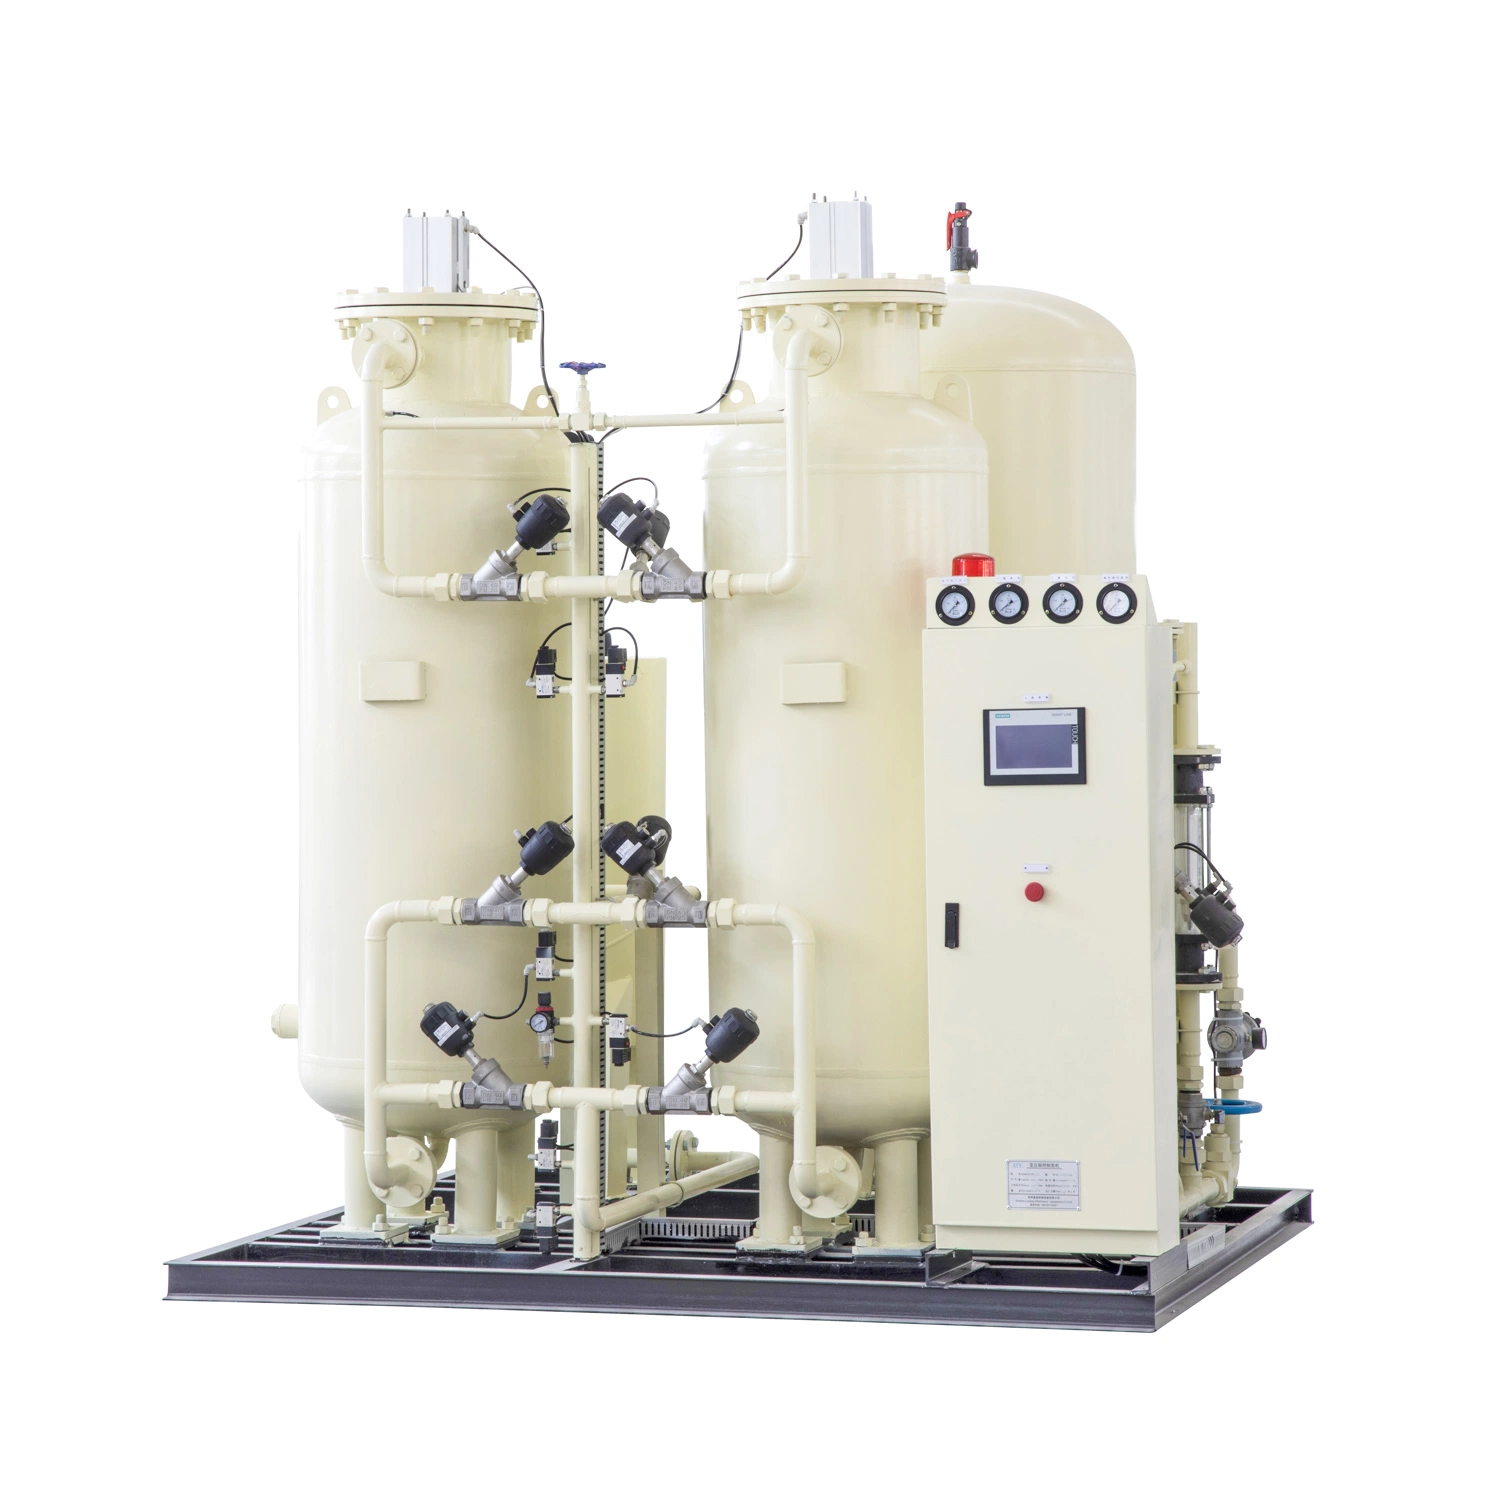 All Oil- Free Oxygen Compressor Psa Oxygen Production Machine Factory Supply Oxygen Purifying Equipment